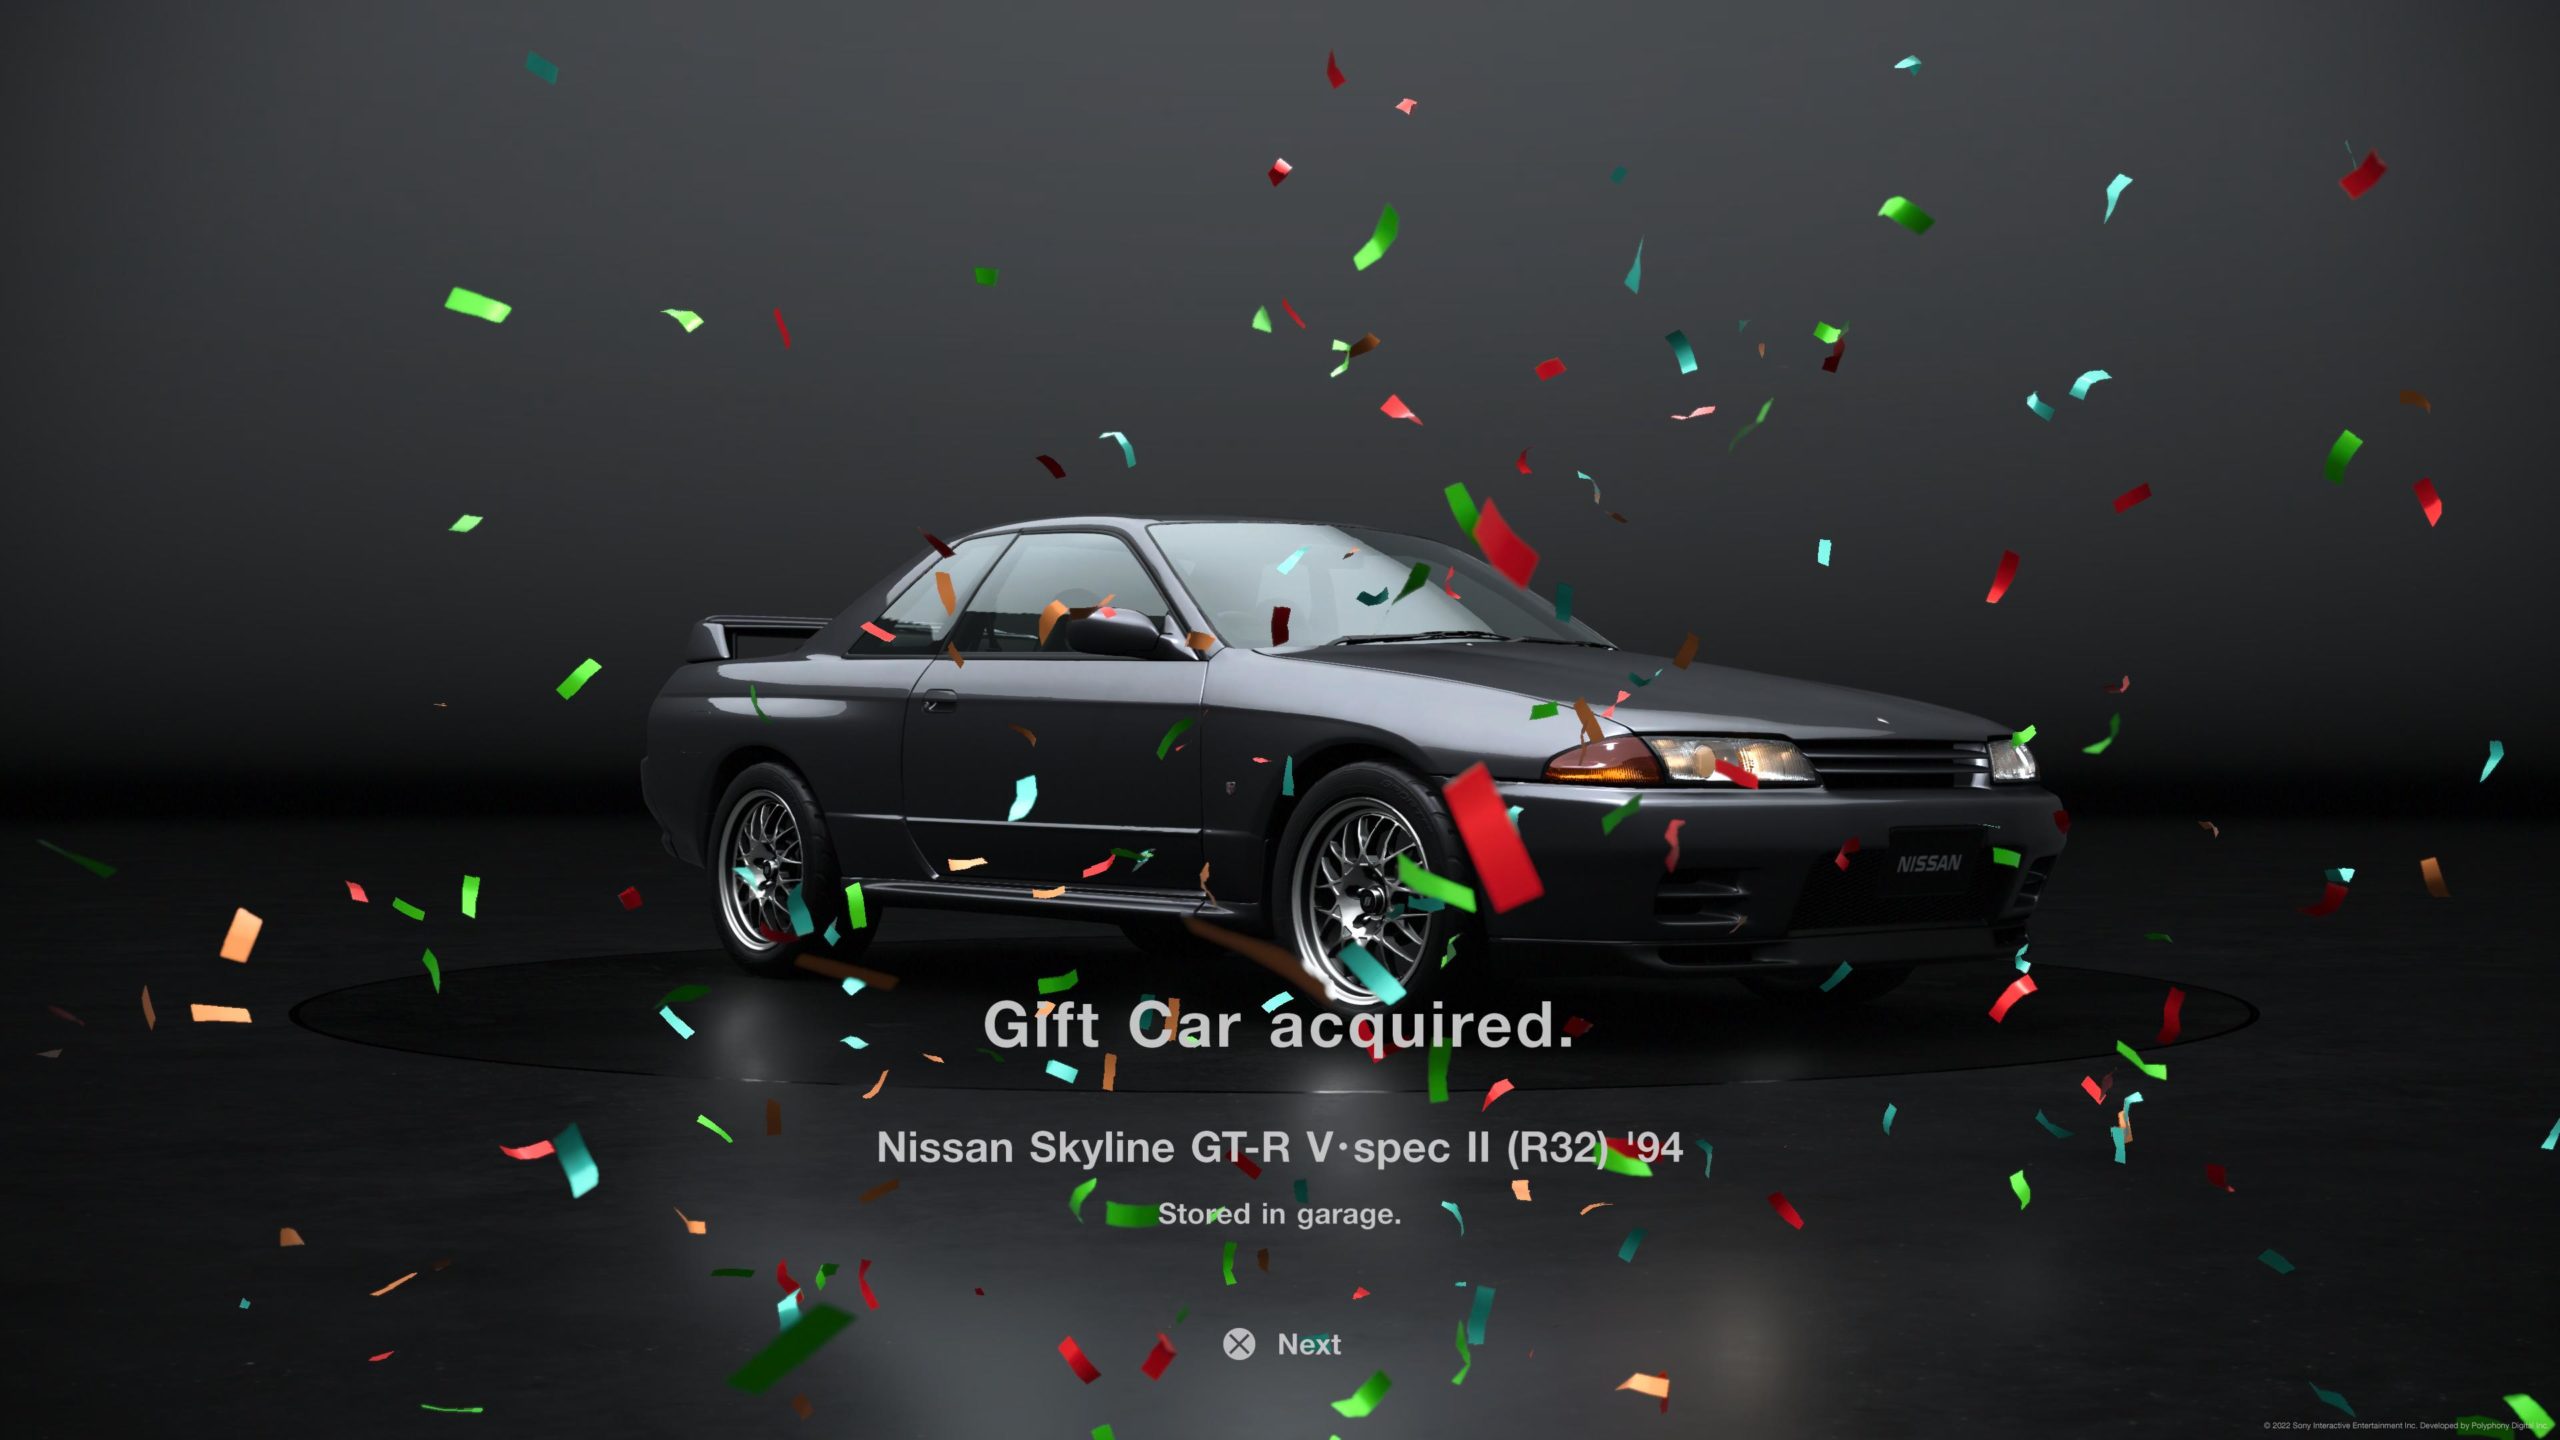 Gran Turismo 7 Review: Appealing to the car collector fantasy